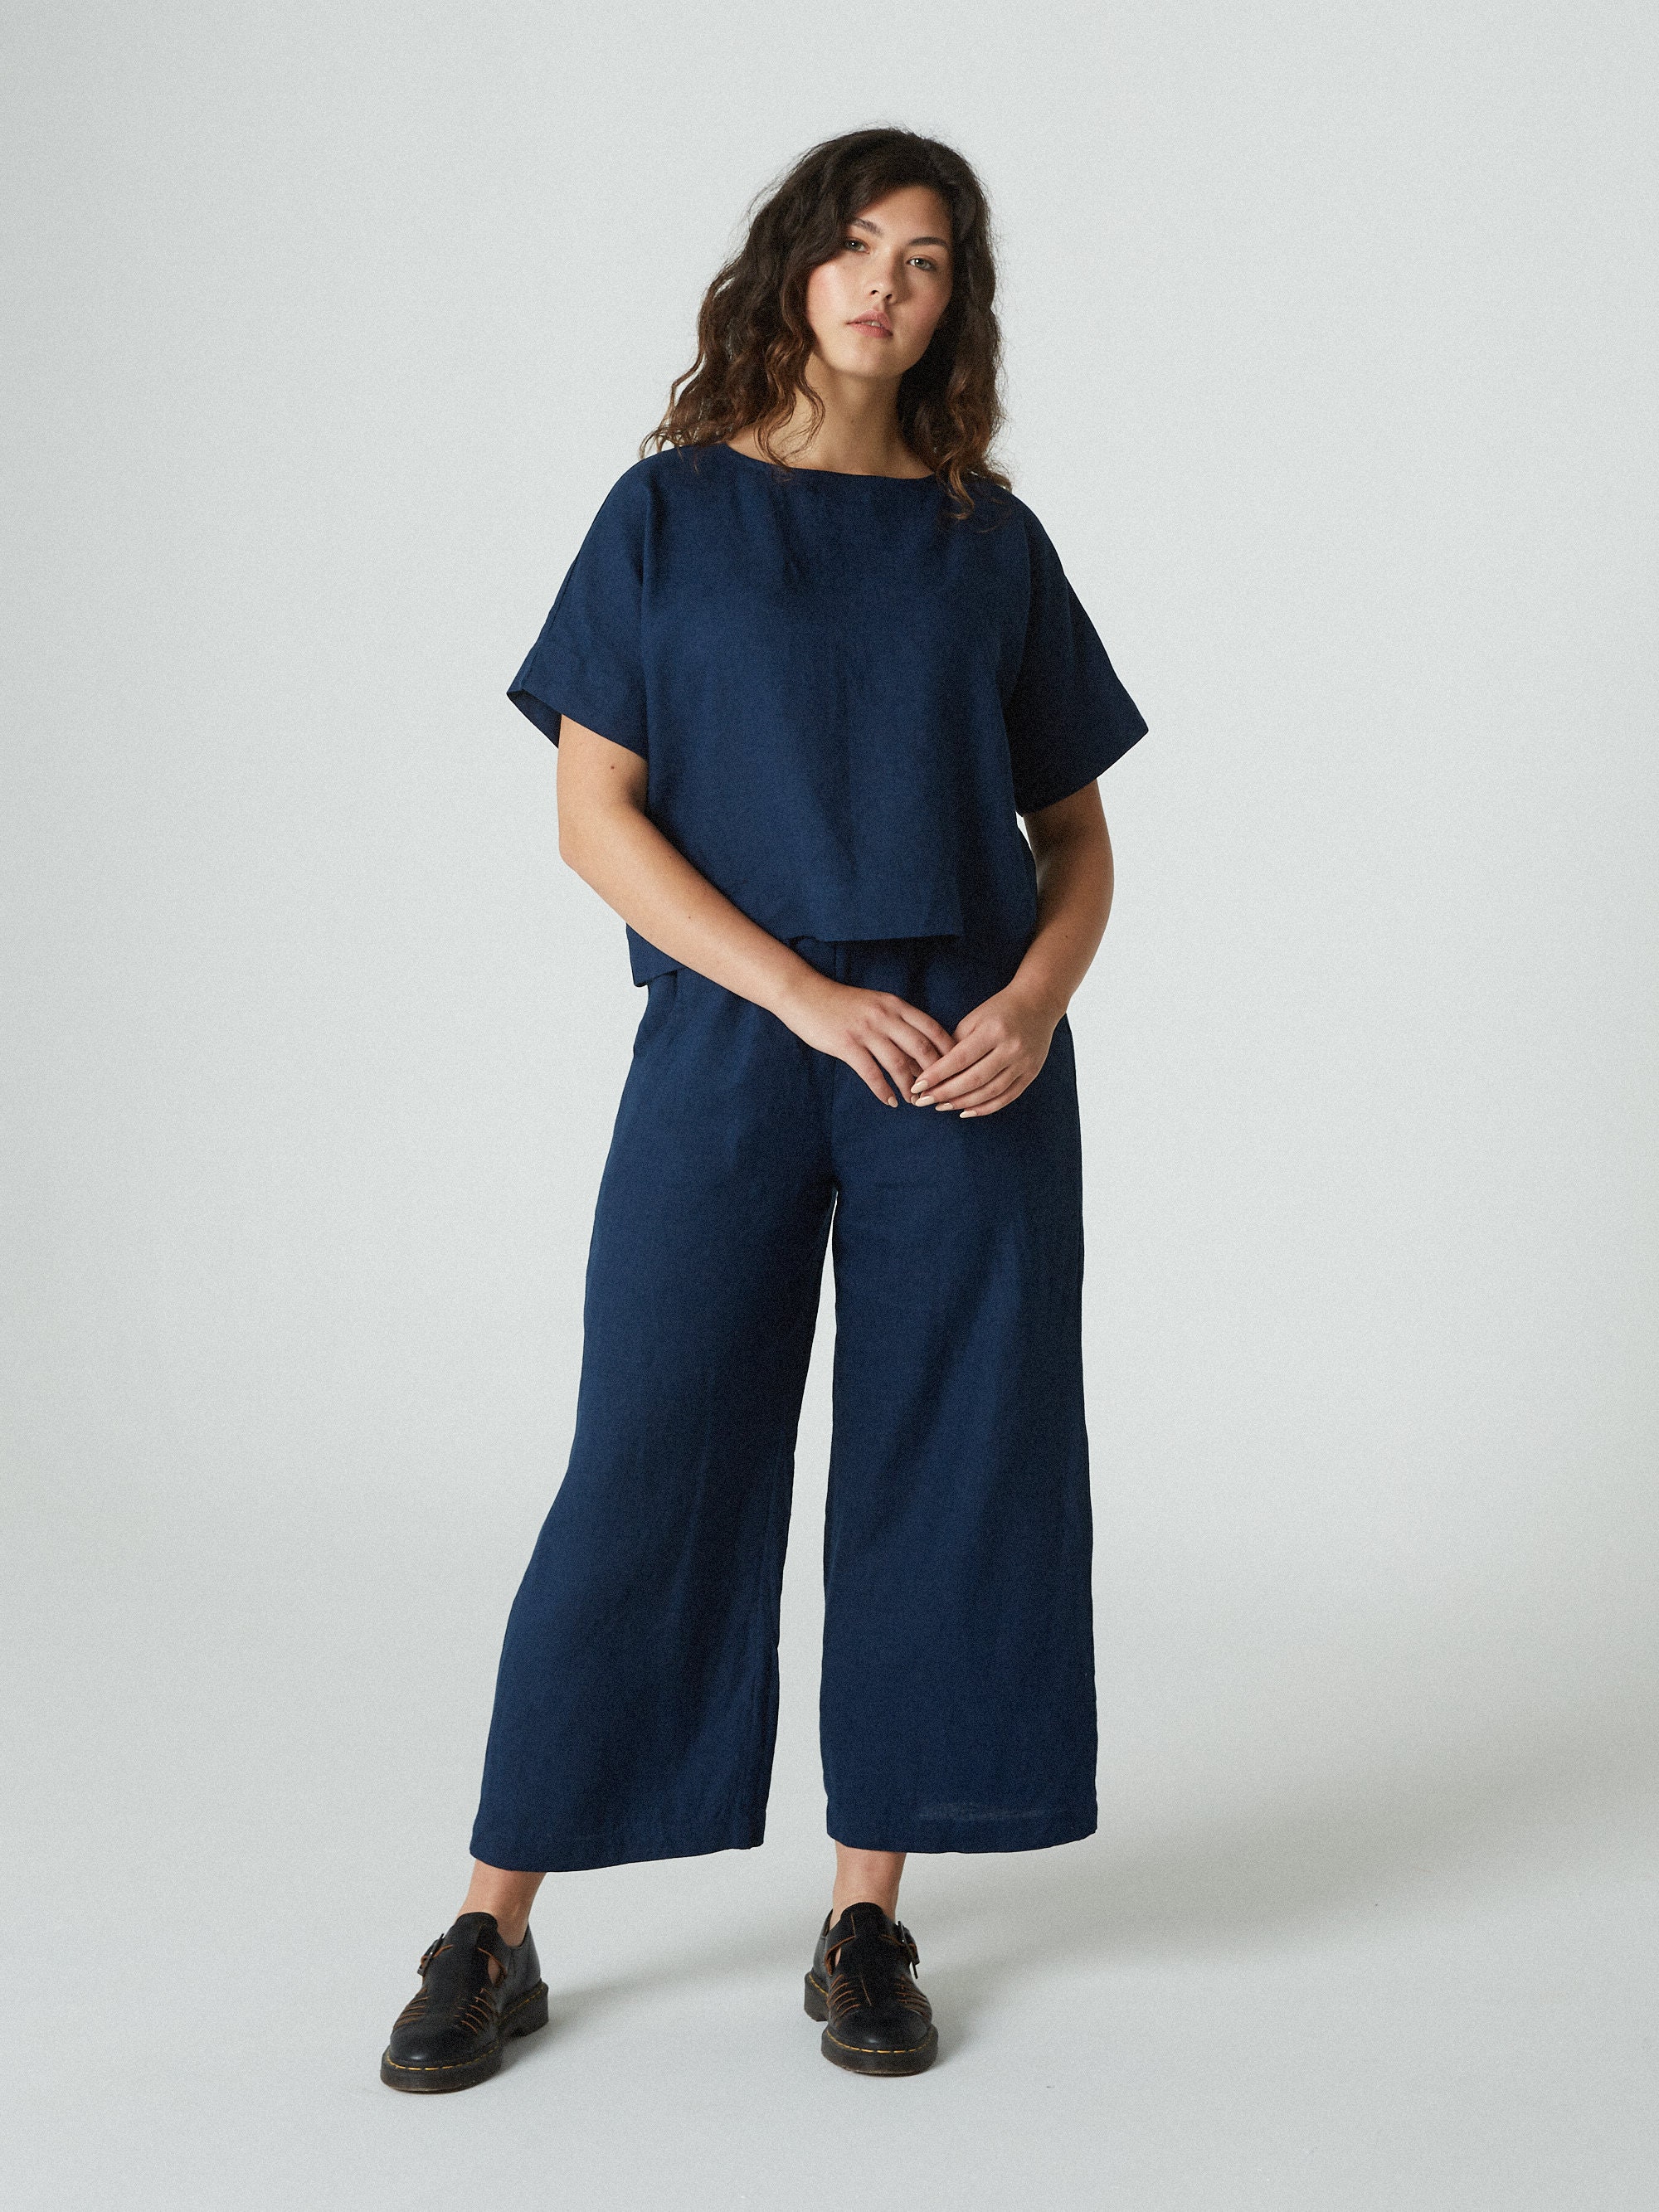 Gal Meets Glam Navy Wide Leg Cropped Pants and Castaner Wedges shopthelook  SpringStyle  Simple spring outfits Wide leg cropped pants Fashion